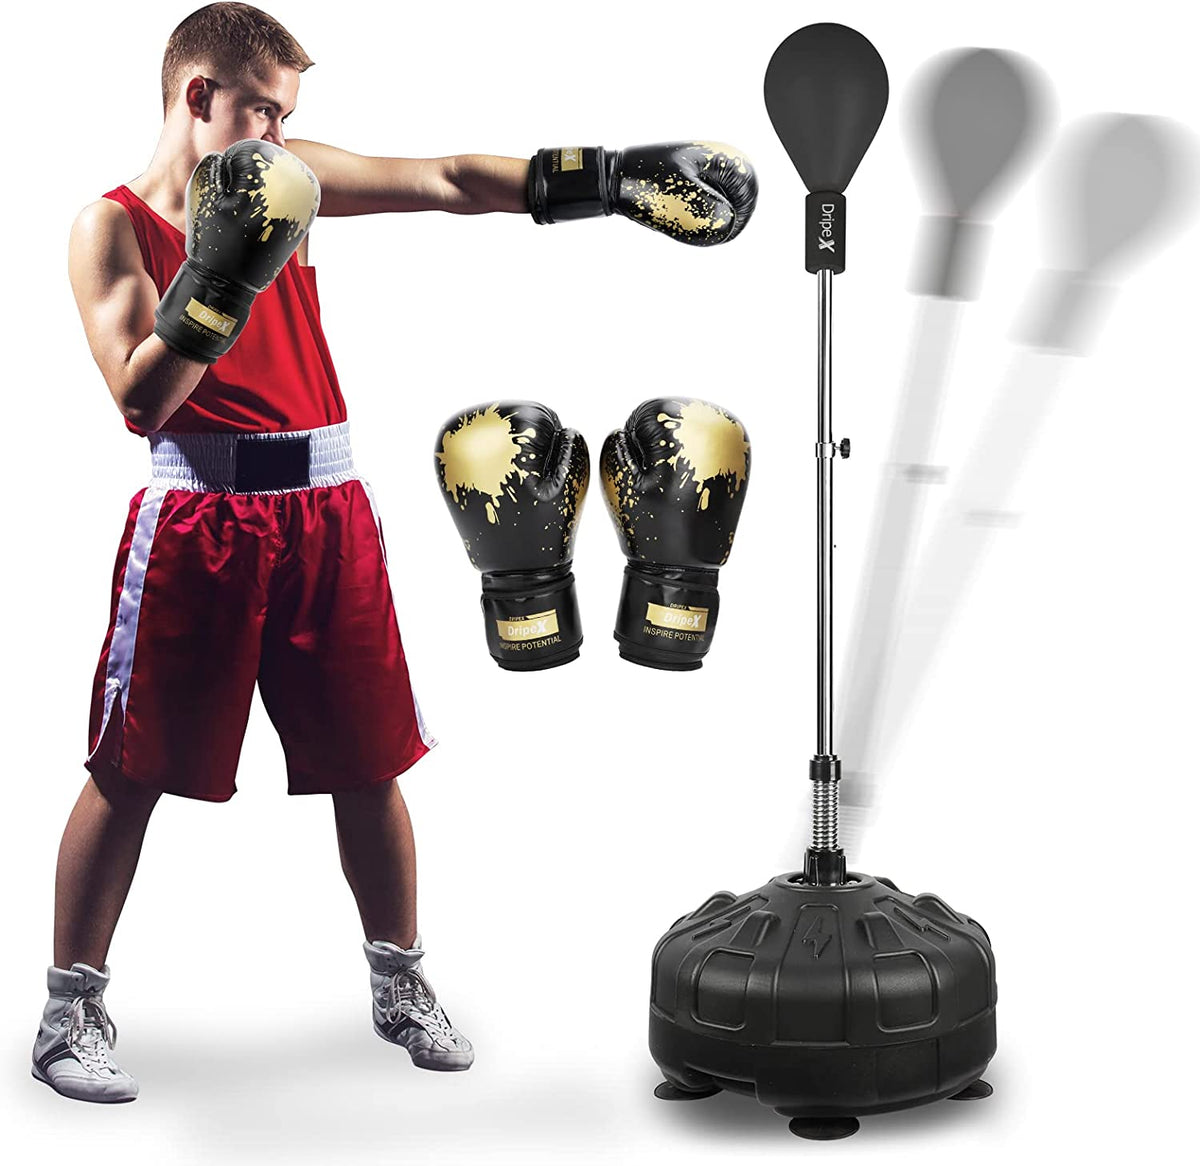  Adjustable Height Punching Bags Speed Ball with Swing Arm for  Stress Release, Training Equipment for Stress Relief & Fitness, Heavy Free  Standing Boxing Speed Punching Bag (Color : Black) 